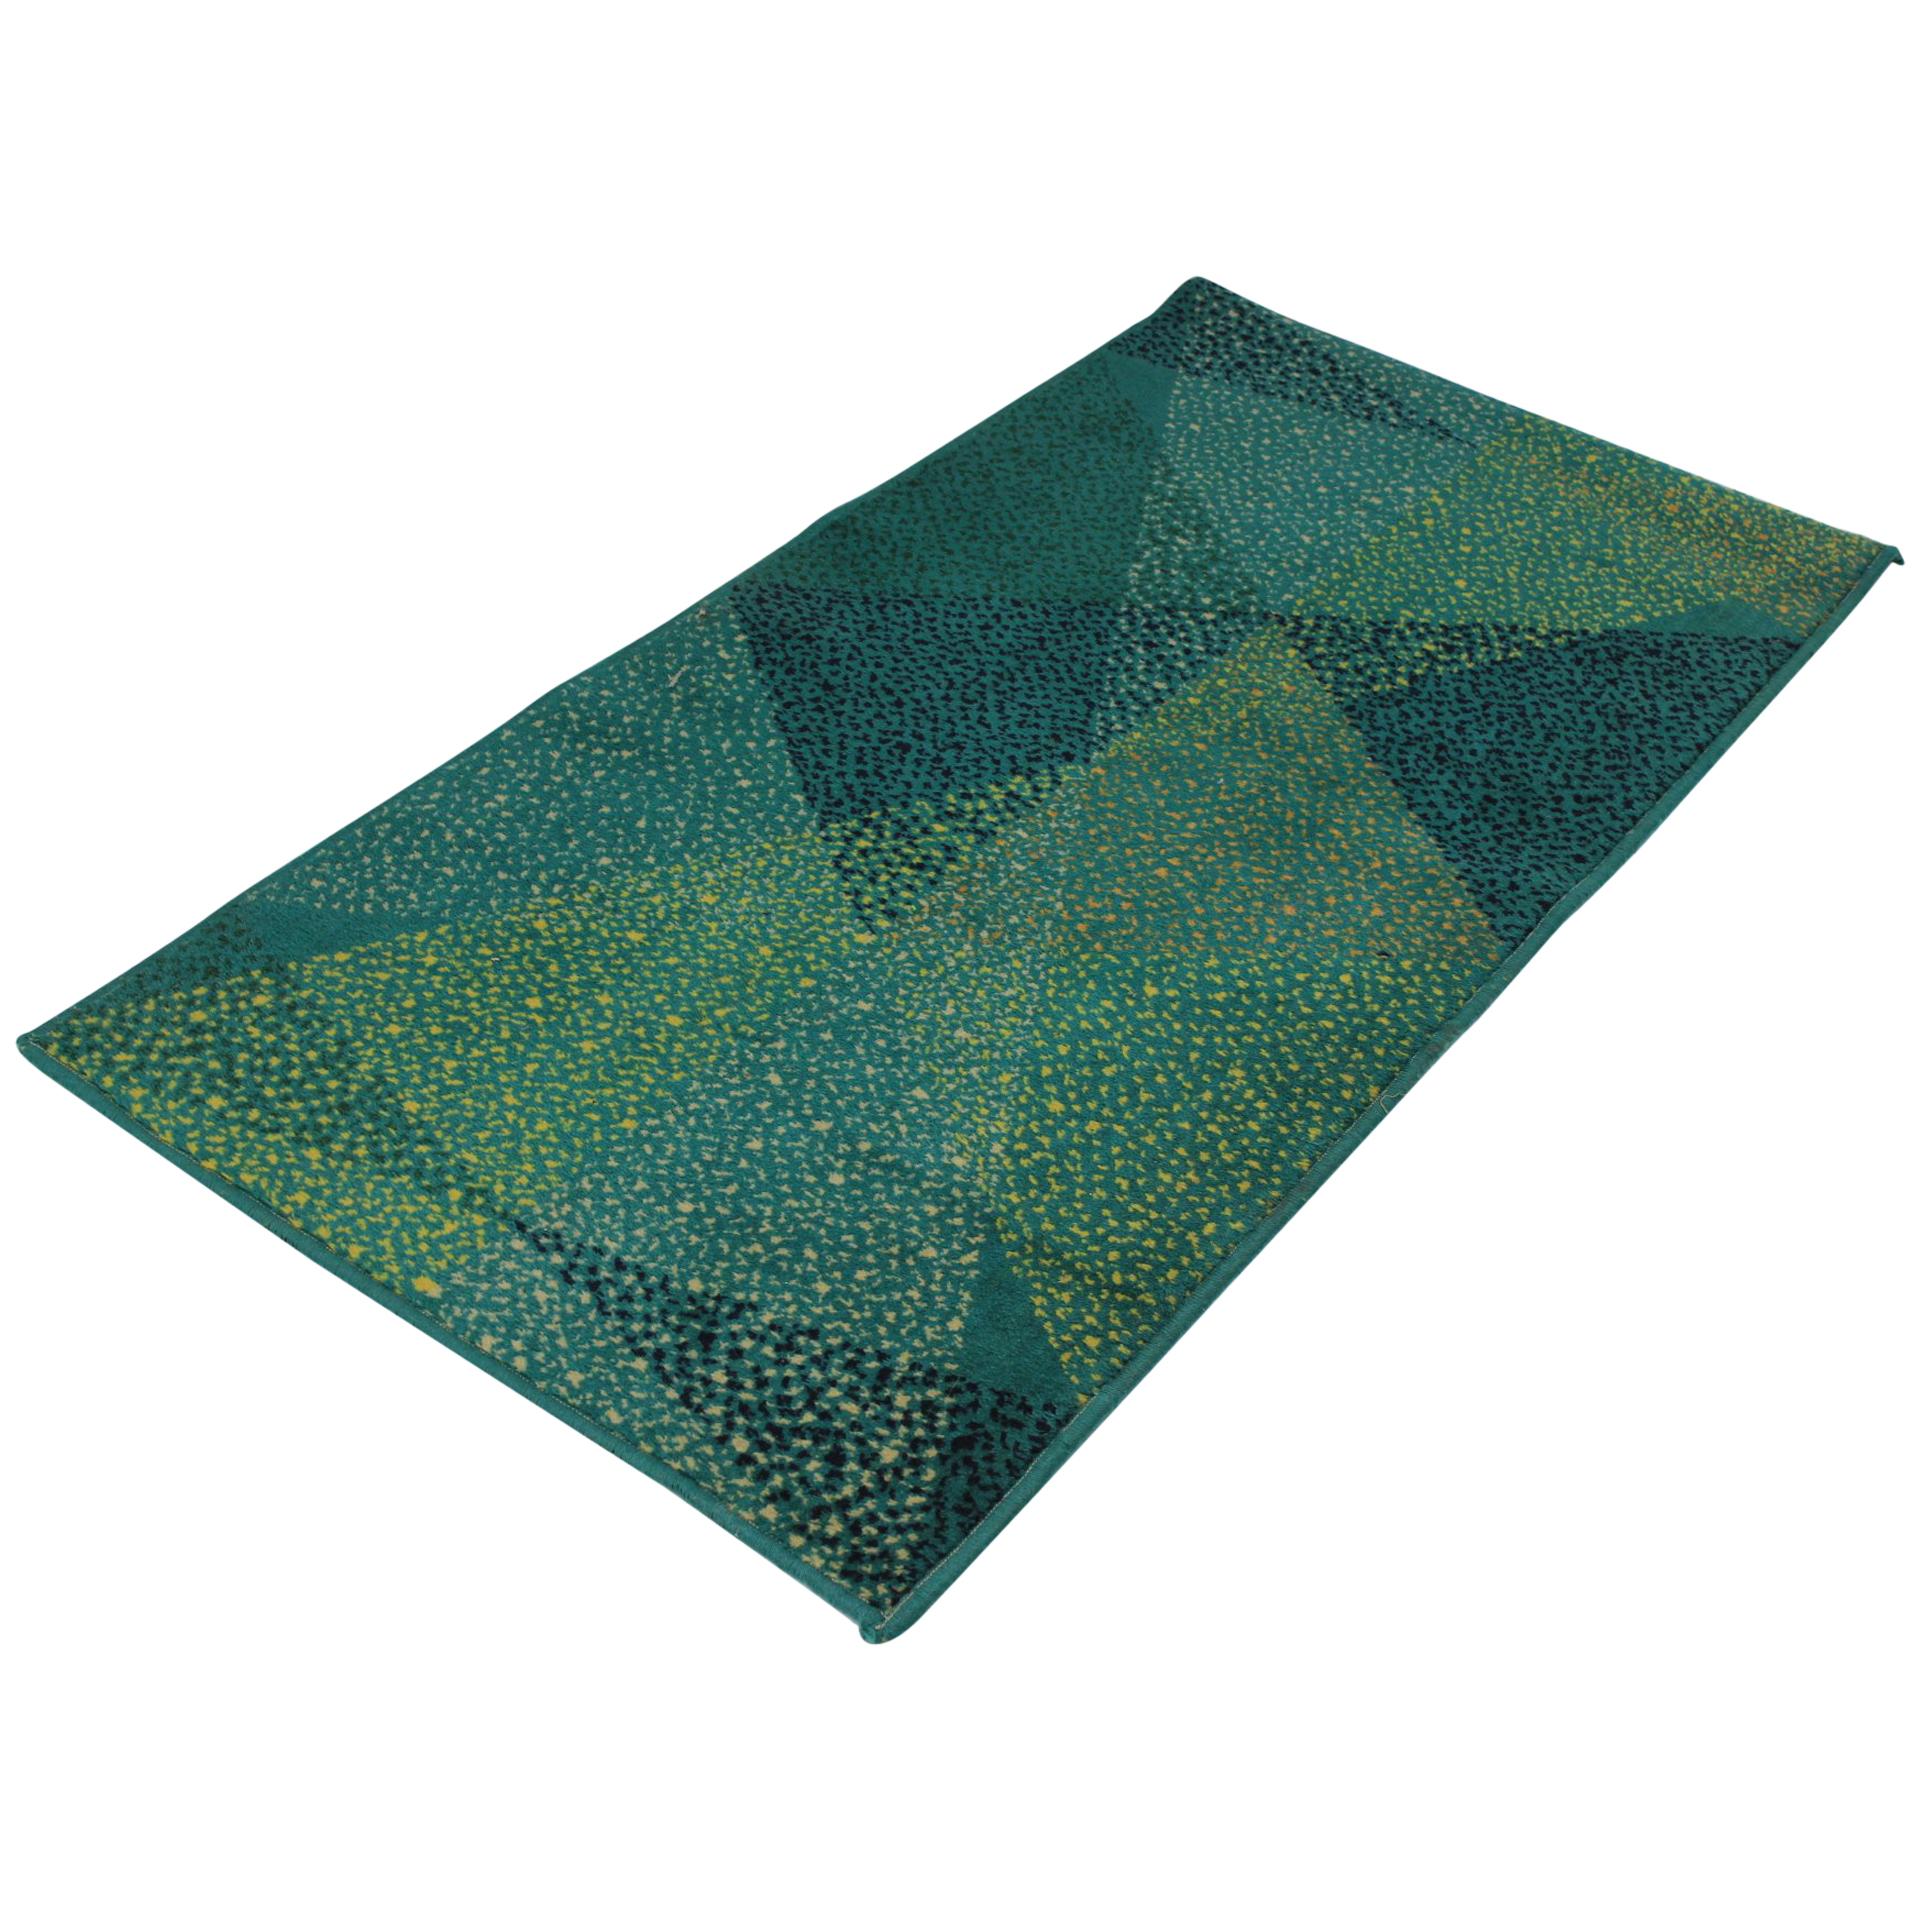 Small Geometric Green Carpet or Rug, 1970s For Sale